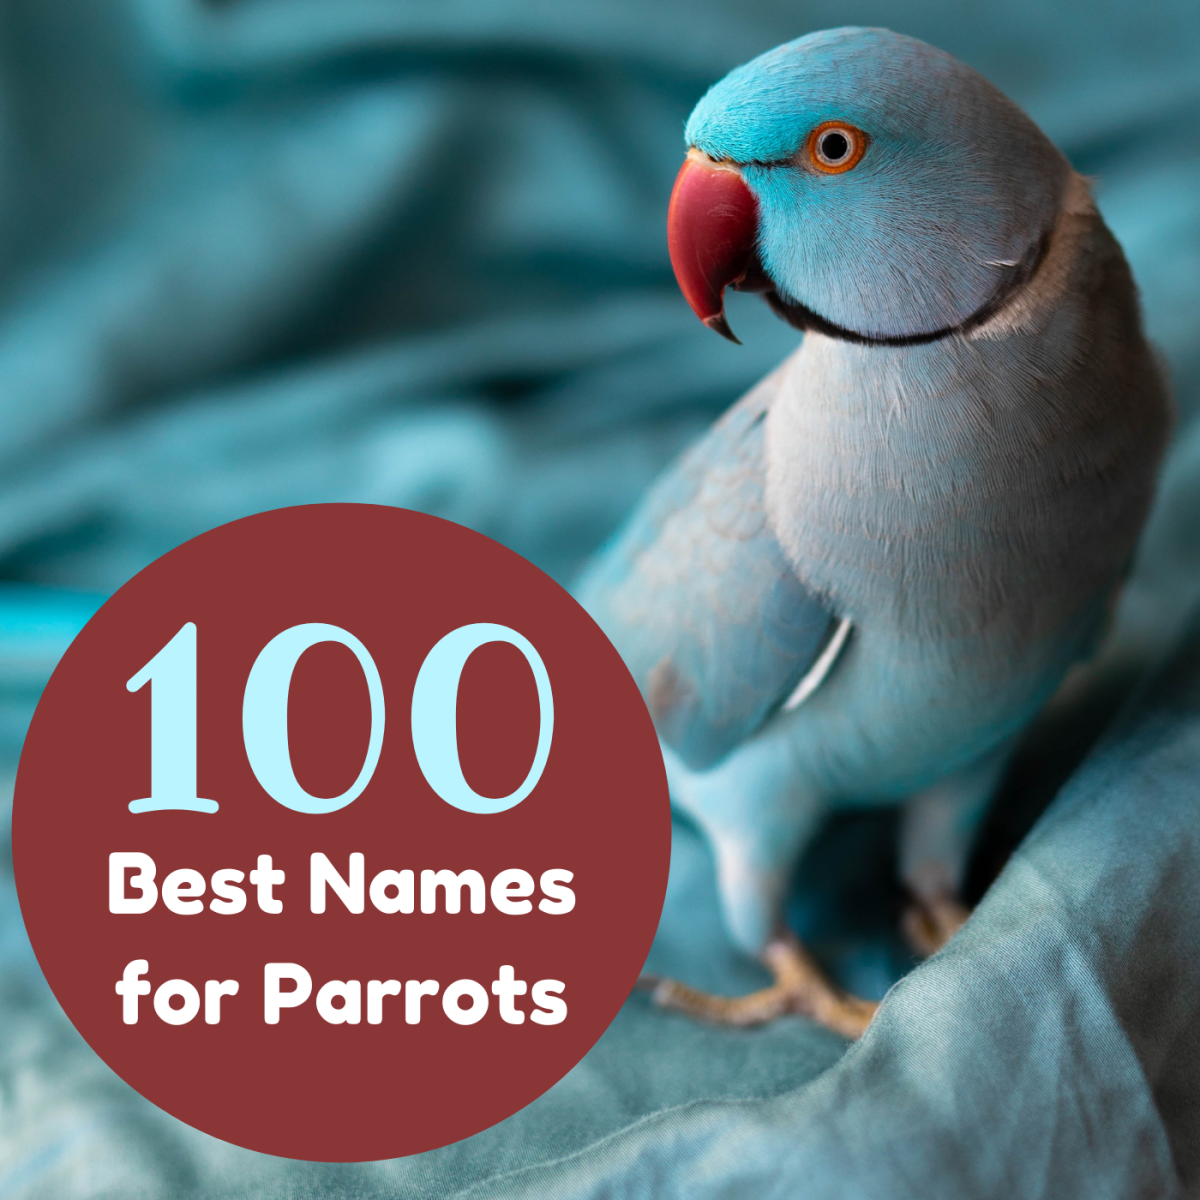 From Aggie to Zed, check out an alphabetical list of great parrot names, and get some tips on how to pick the perfect name for your bird!